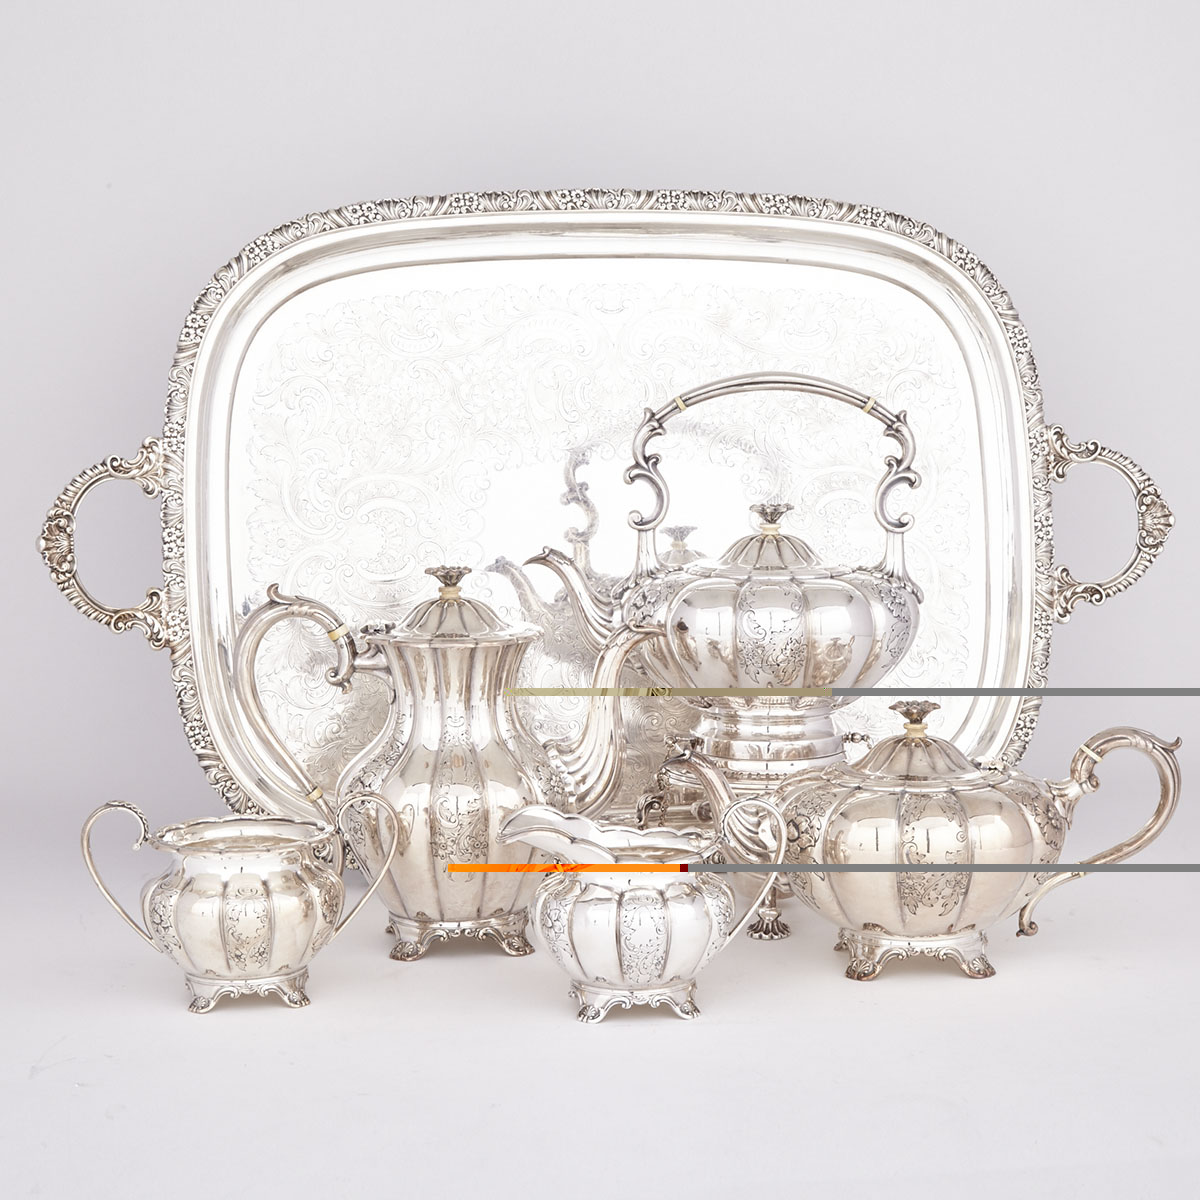 English Silver Plated Tea and Coffee Service, Charles Howard Collins, 20th century